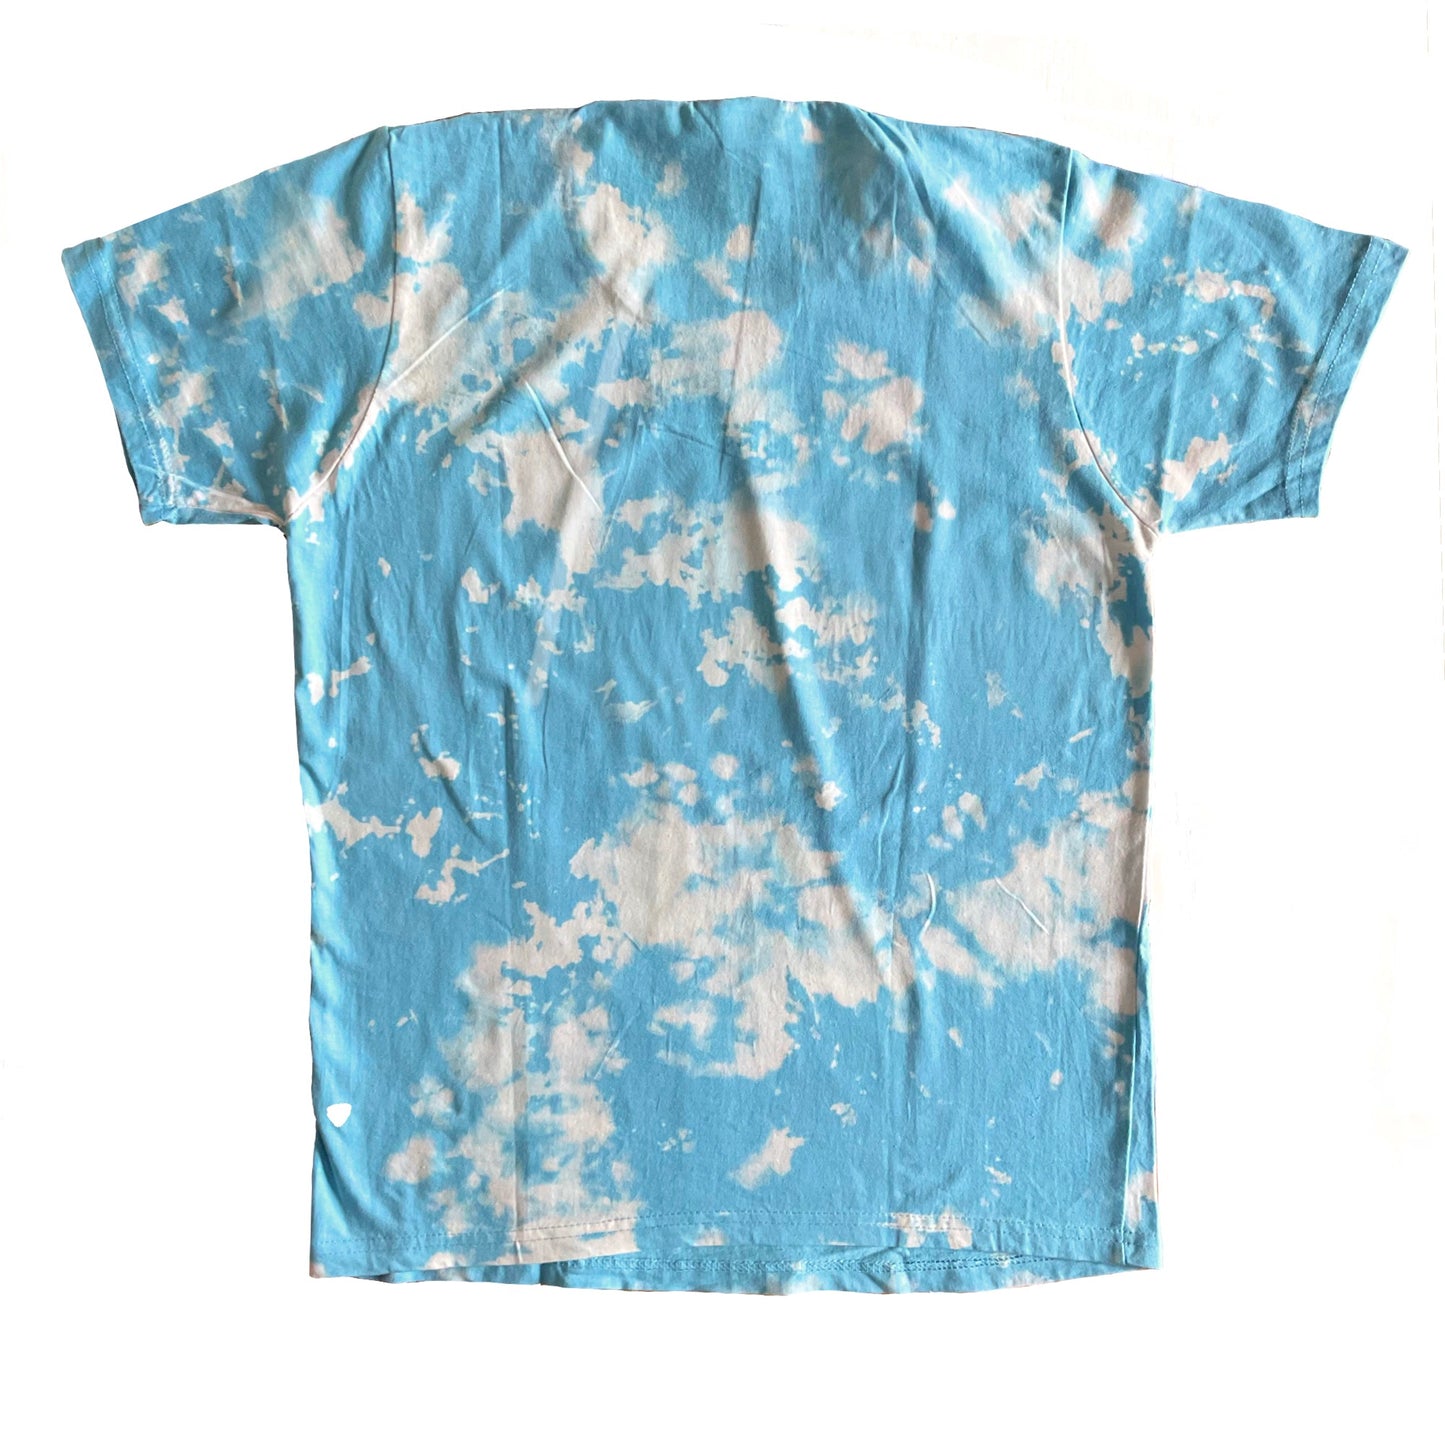 Squirtle Tie-Dye Unisex T-Shirt